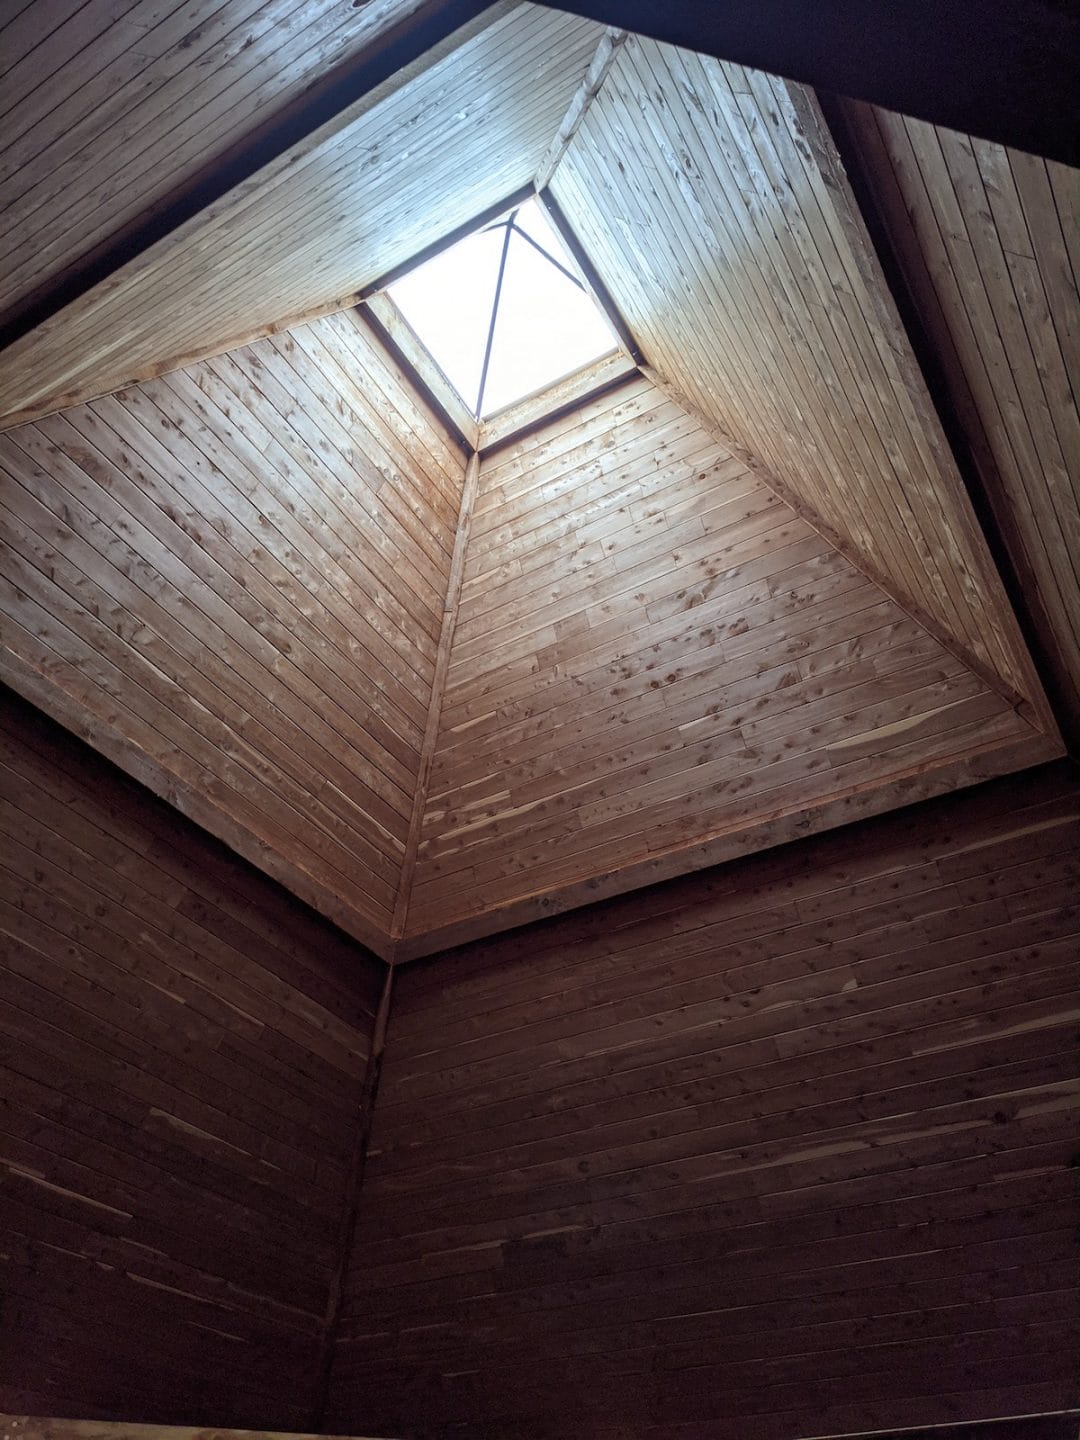 interior view of a pyramid shaped skylight at the peak of a vaulted wooden ceiling